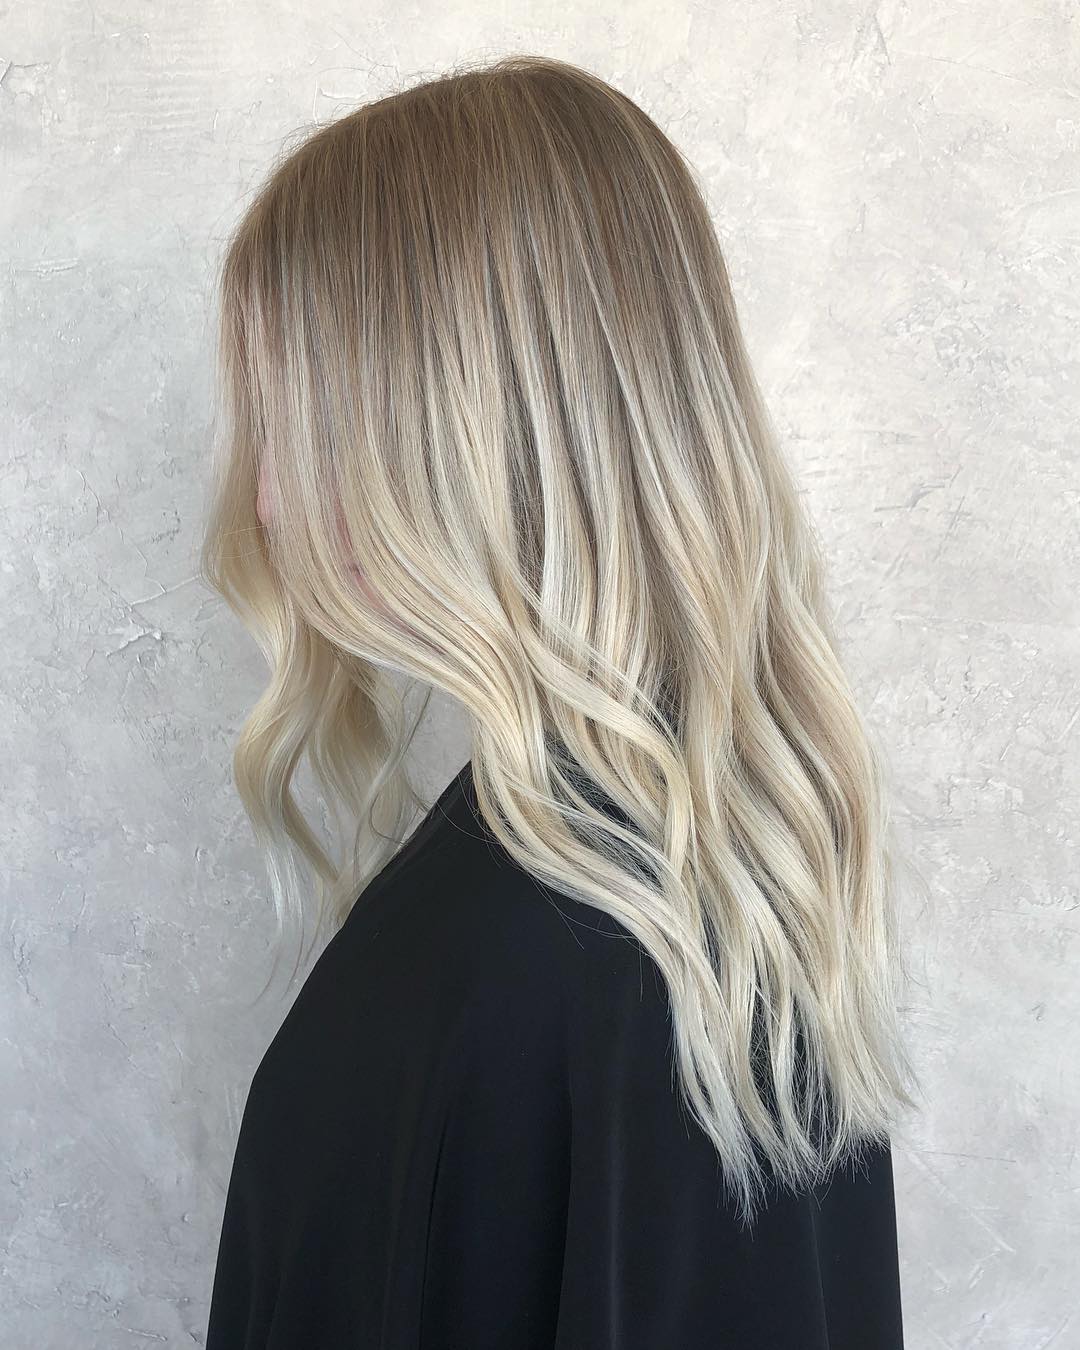 Beautiful Ice Blonde Hairstyle. Pic by emmanichols_hair